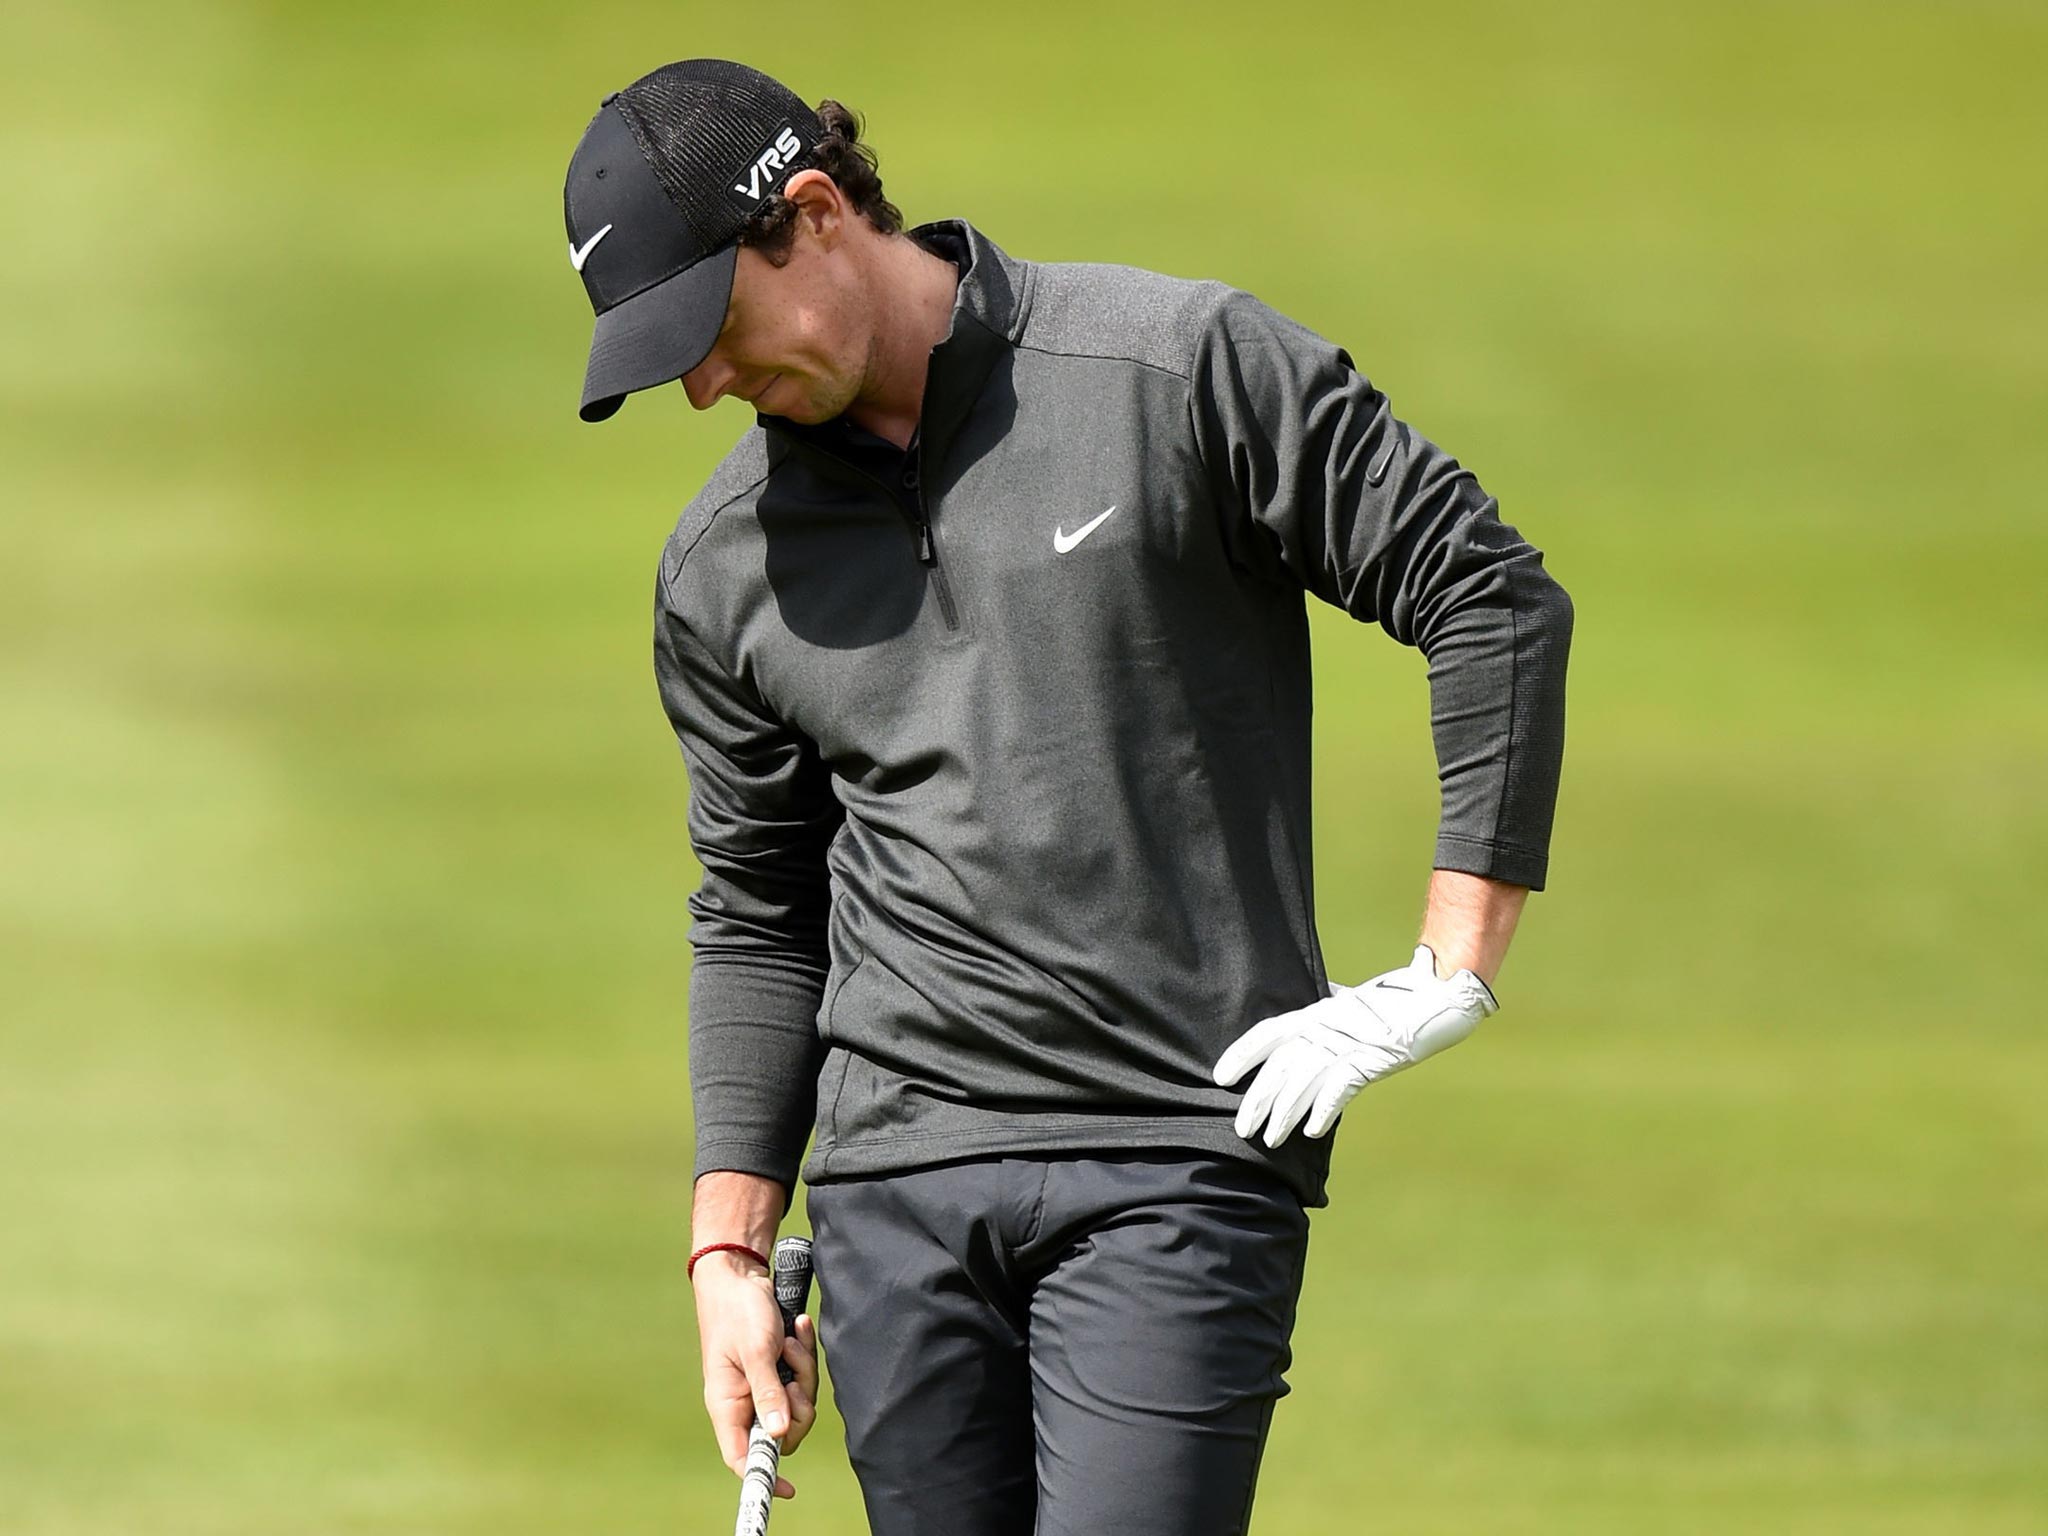 Rory McIlroy feels the strain during yesterday’s first round at Wentworth